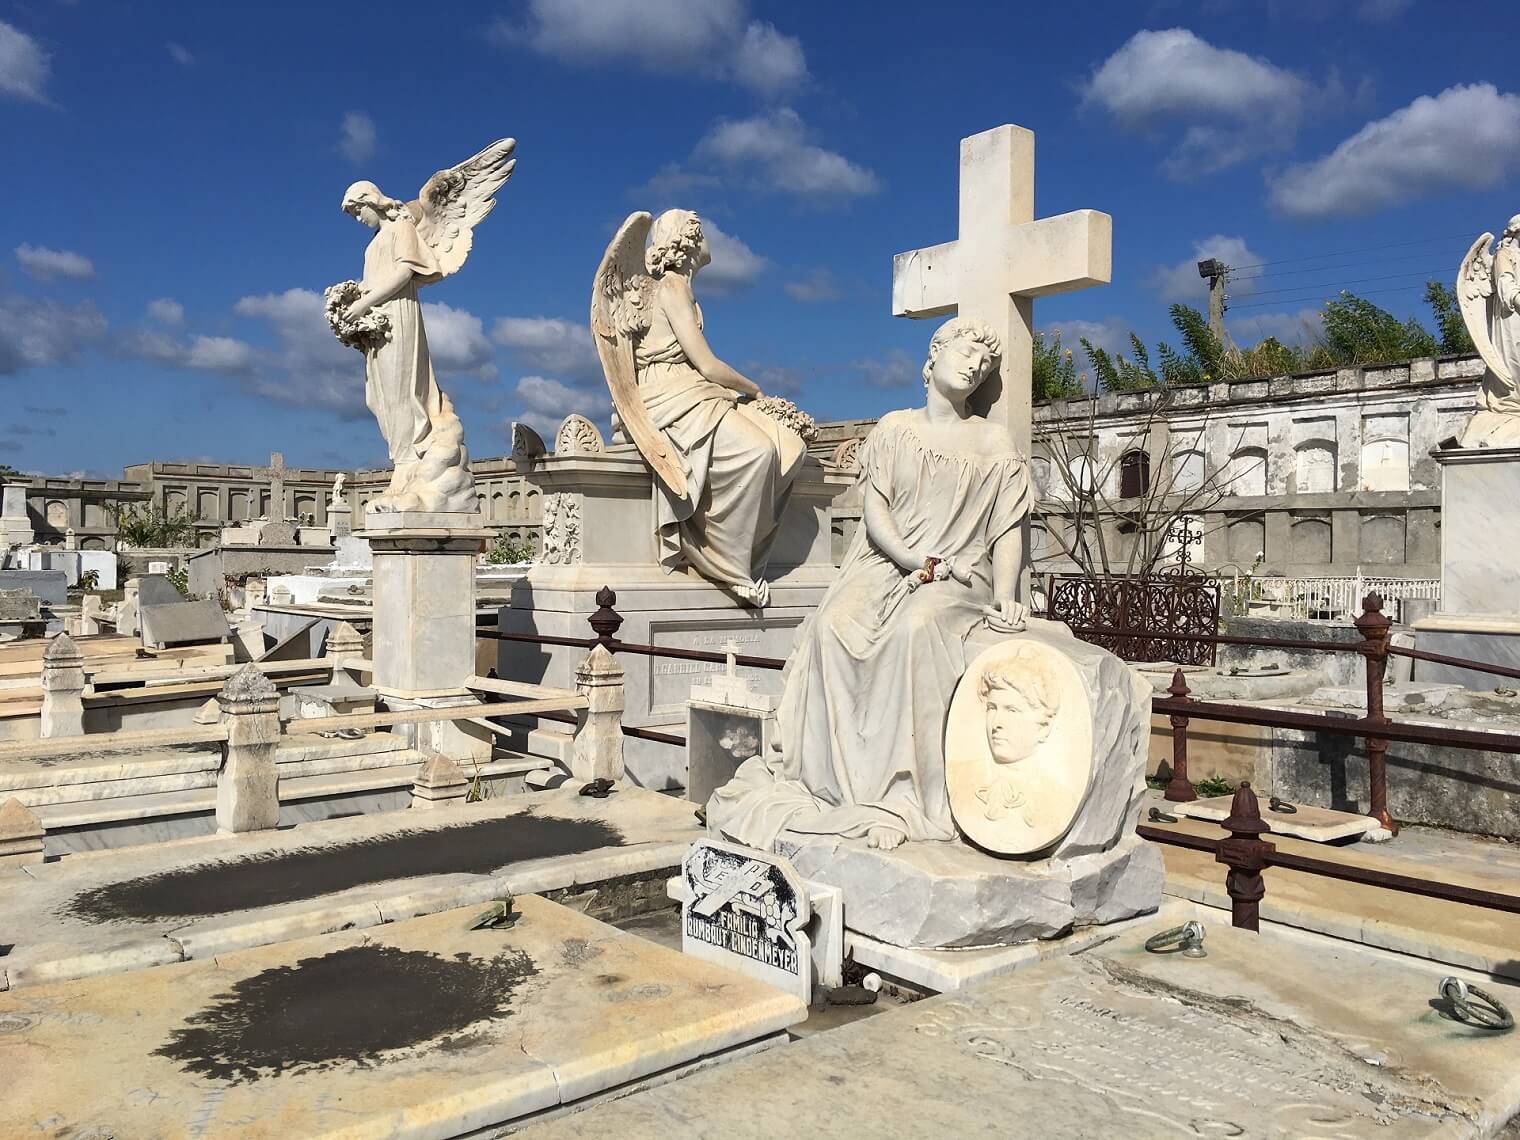 La Reina cemetery. things to do in Cienfuegos.